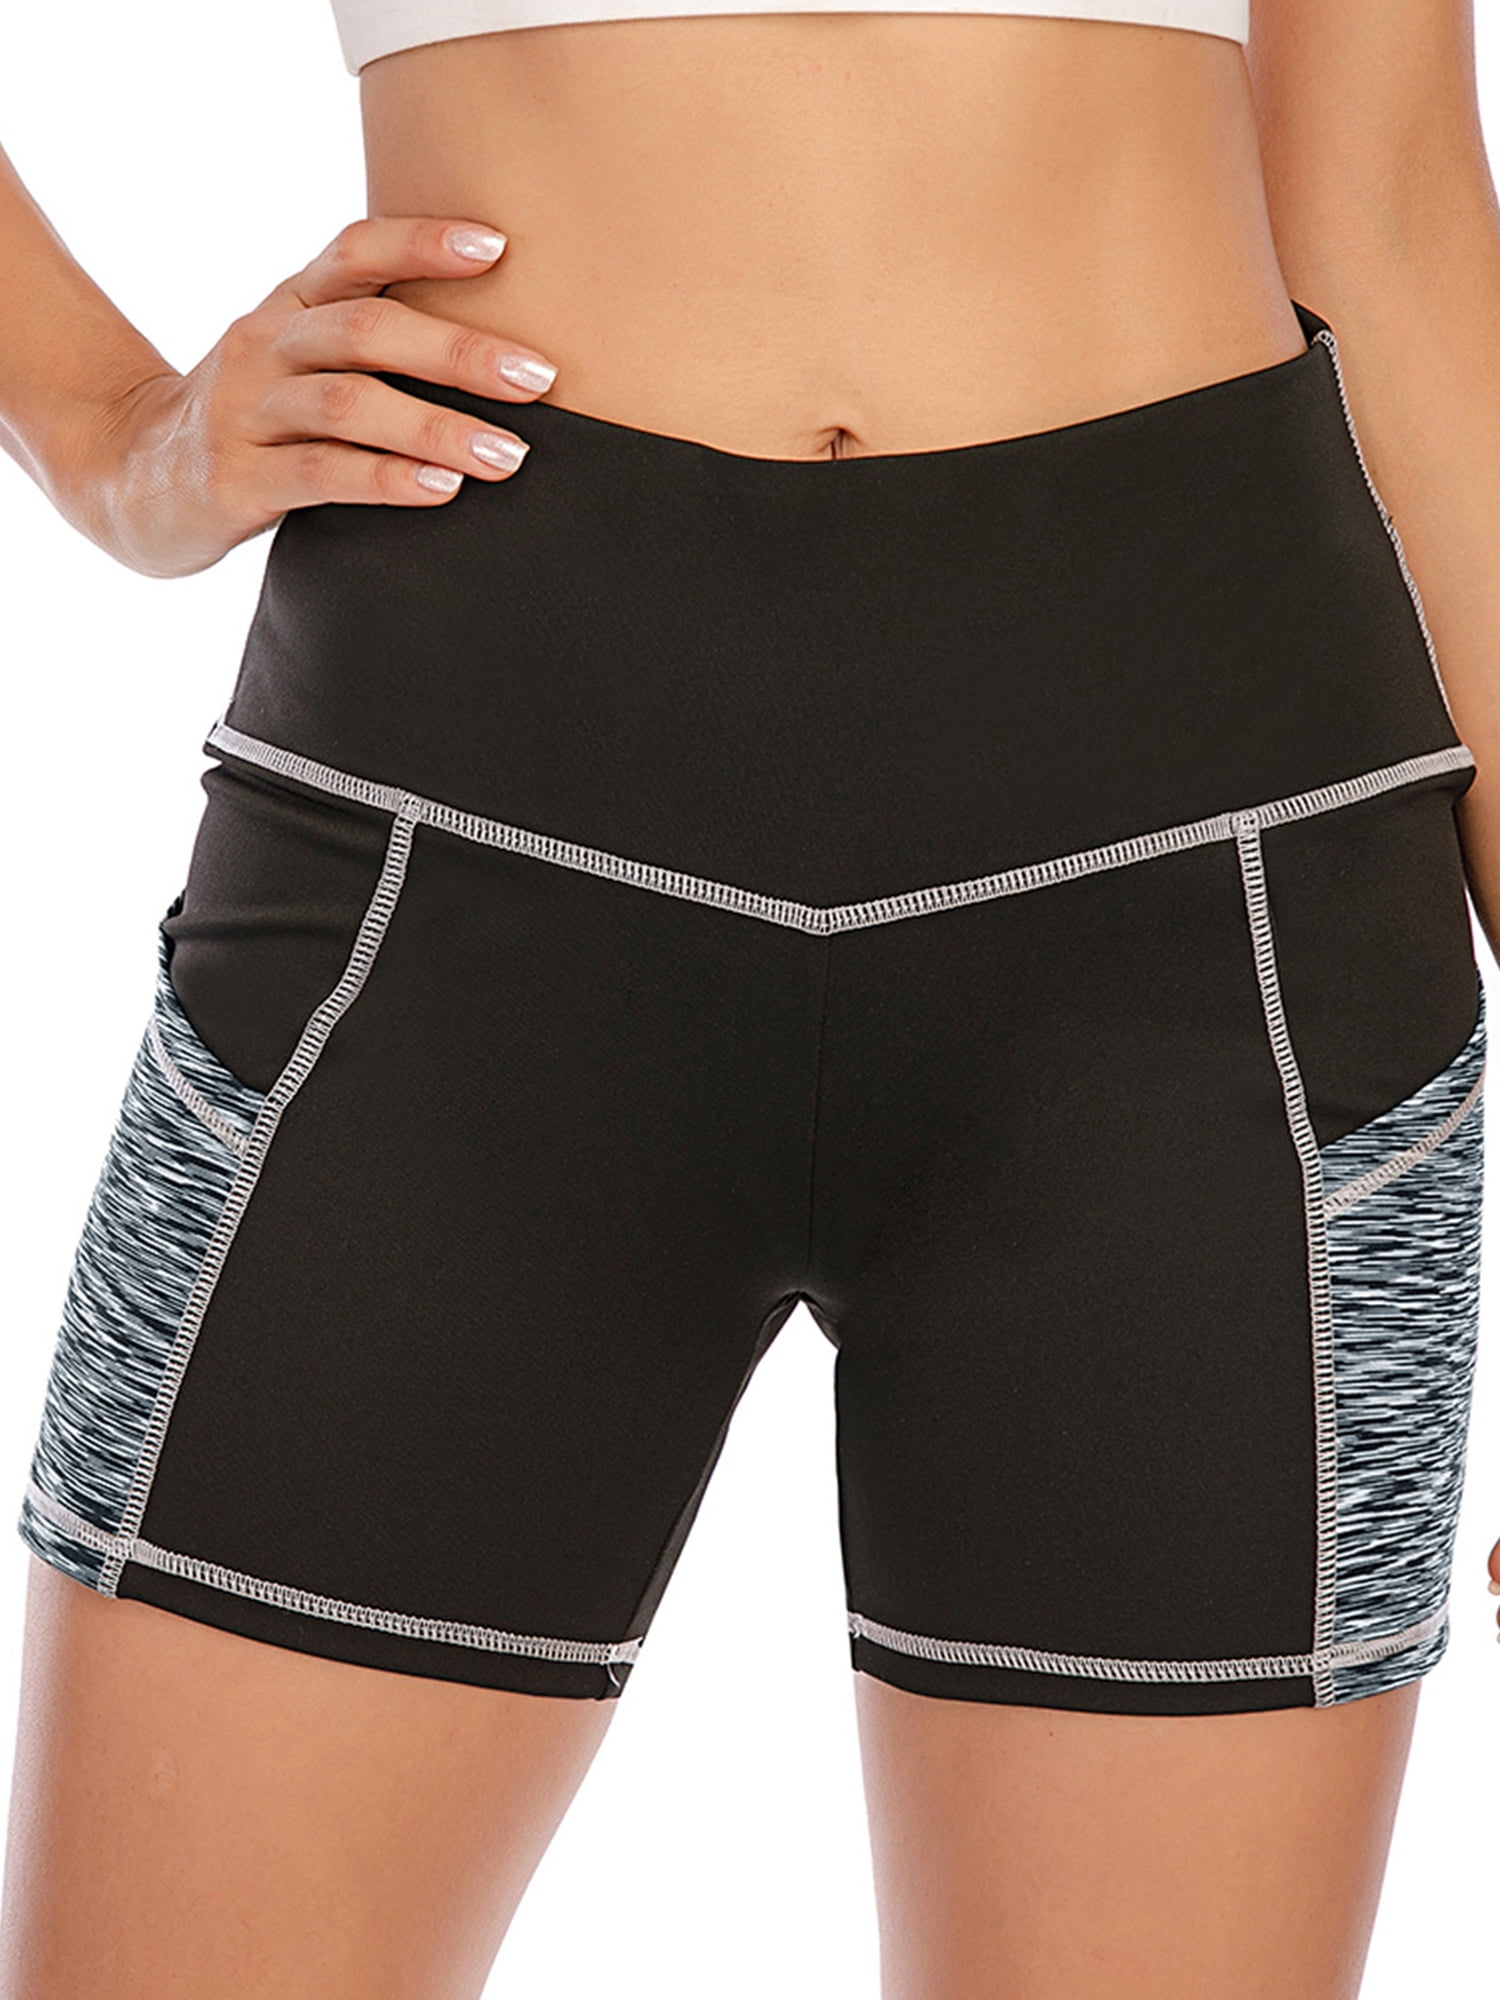 5 Day Female workout shorts for Beginner